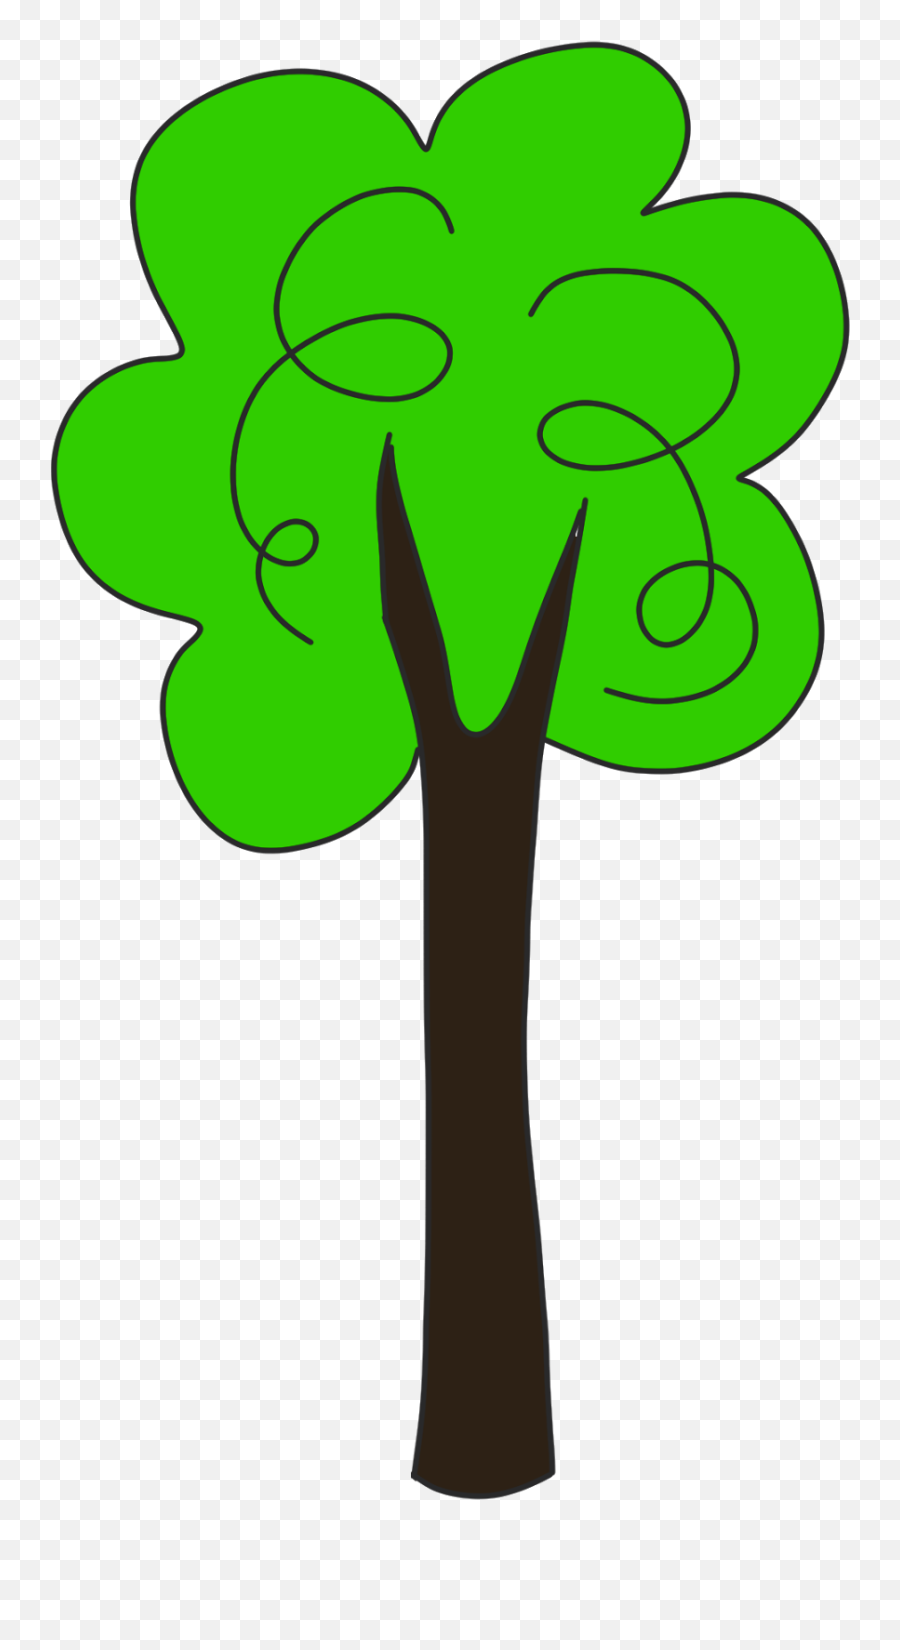 Clipart That You Can Copy And Paste - Tall Tree Clipart Emoji,Batman Emoji Copy And Paste